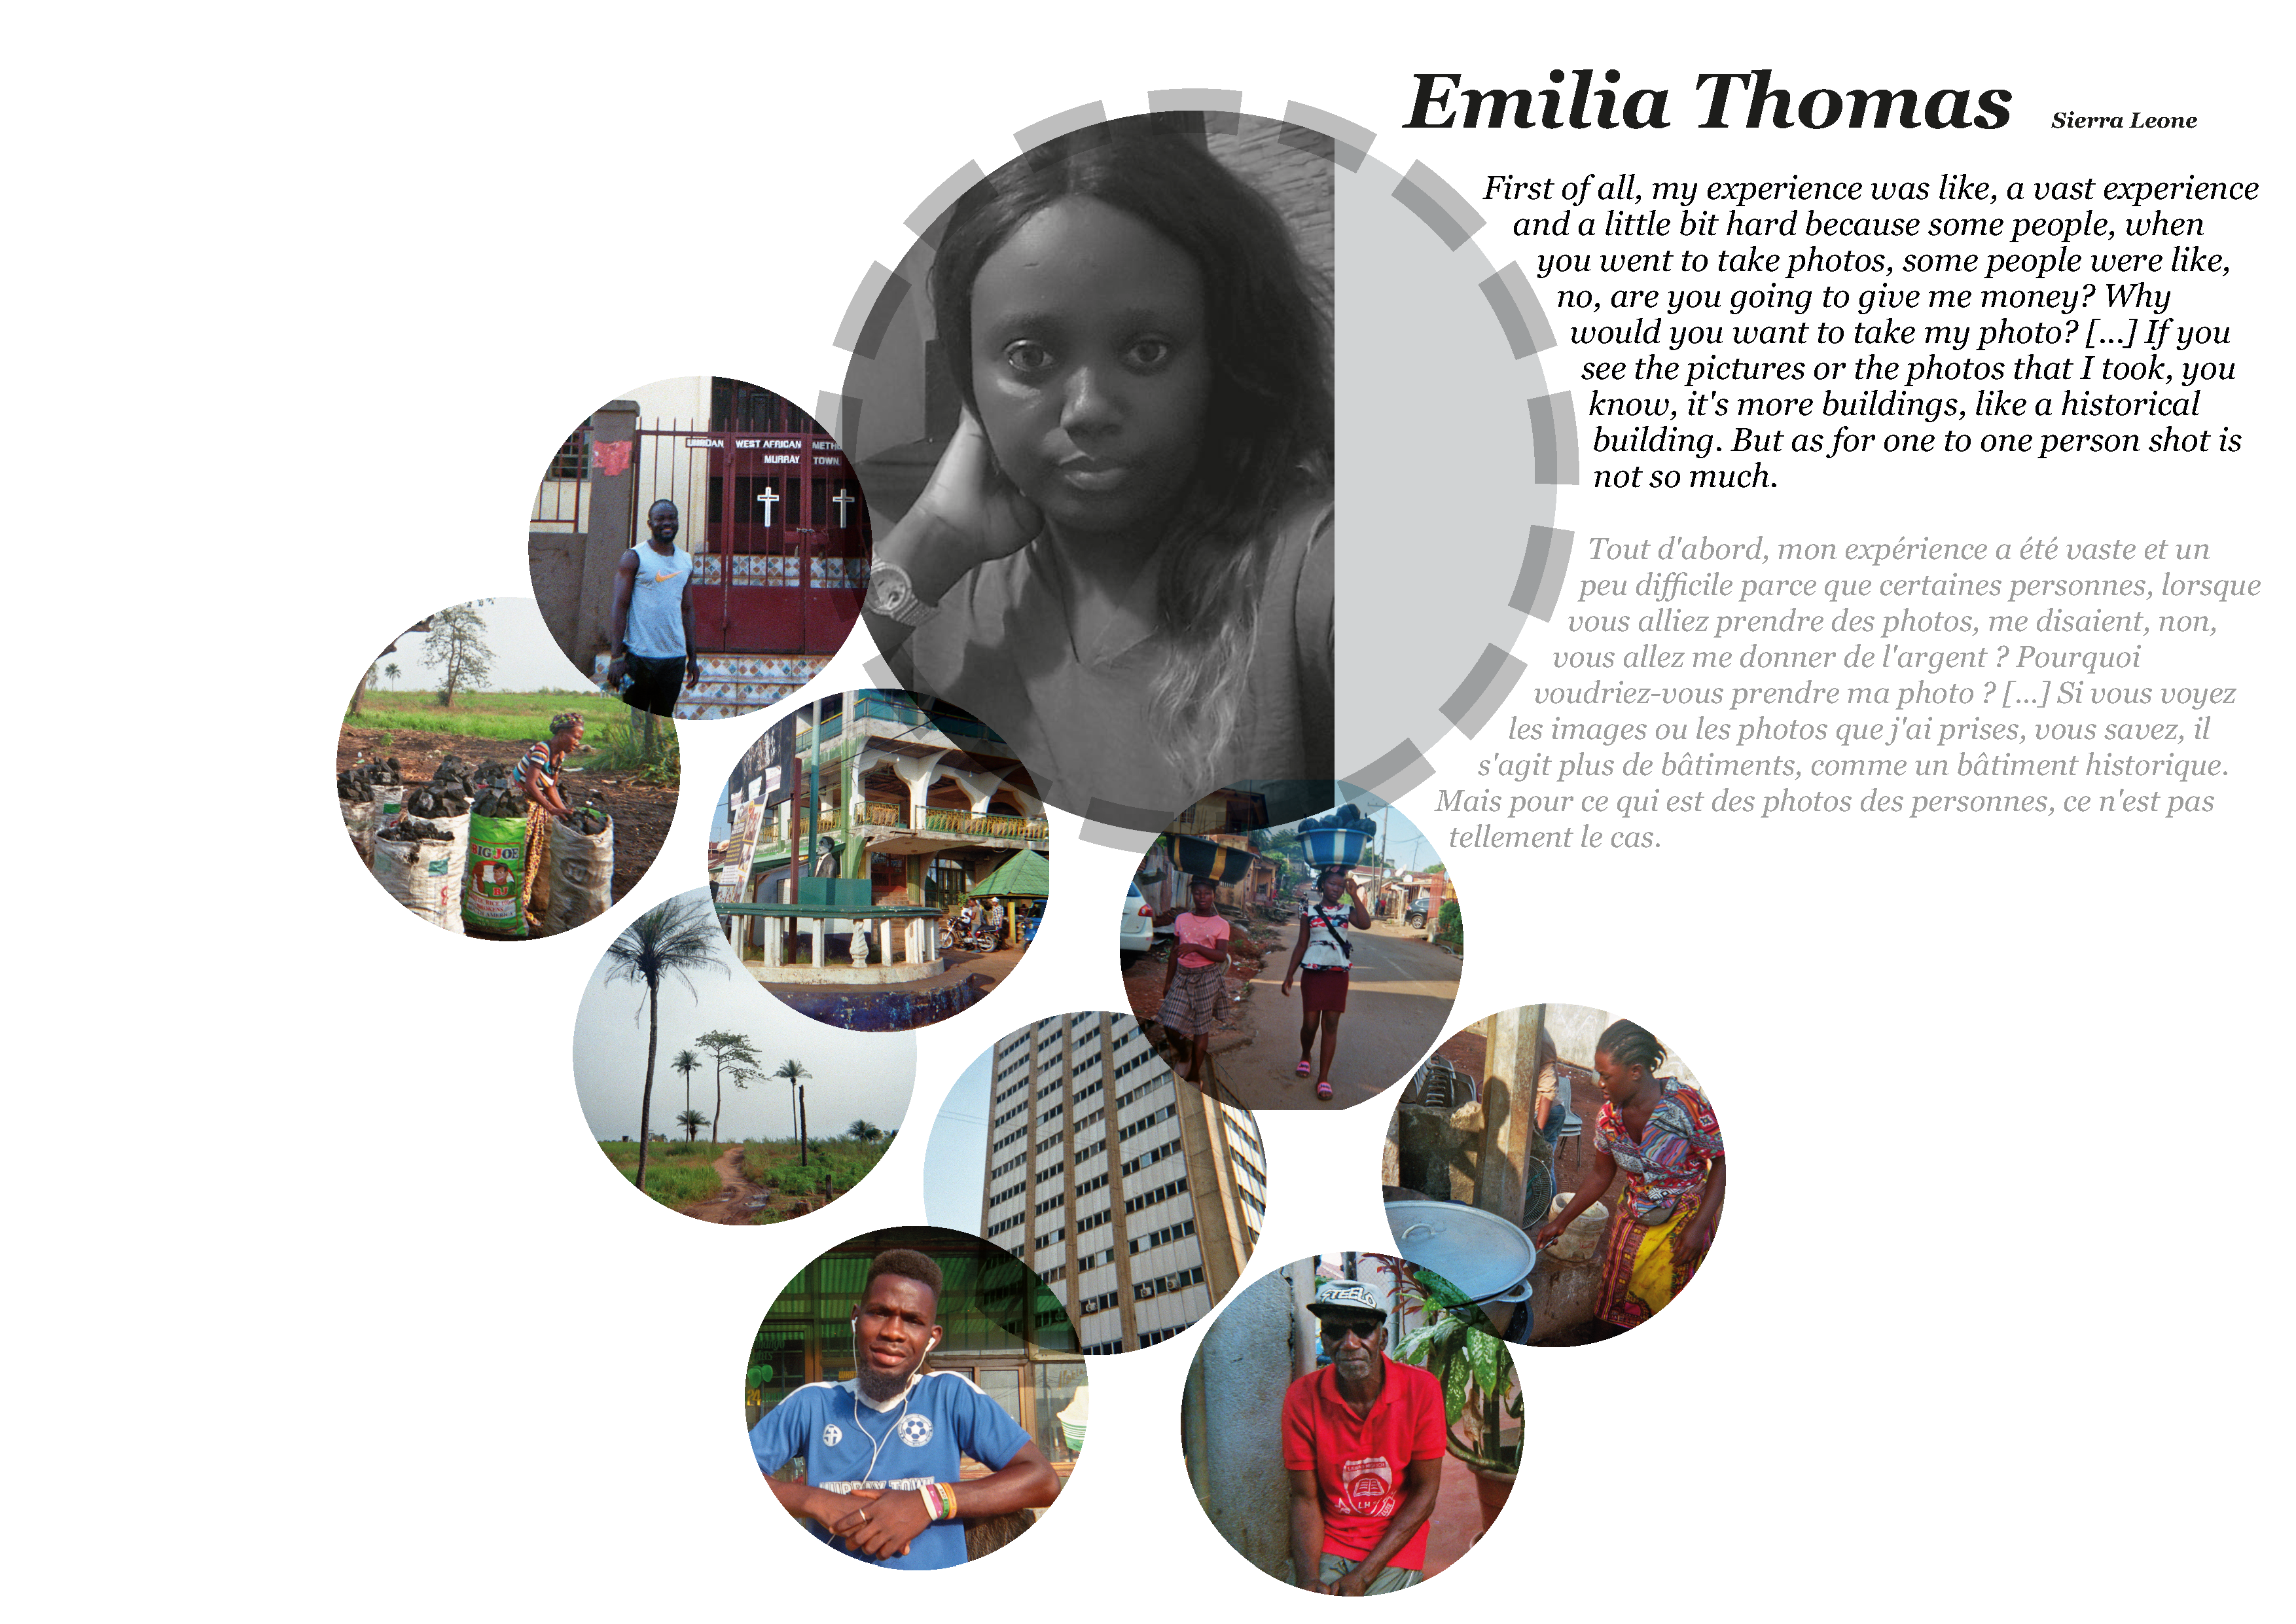 Collage of pictures of religion and peace by Emilia Thomas in Sierra Leone